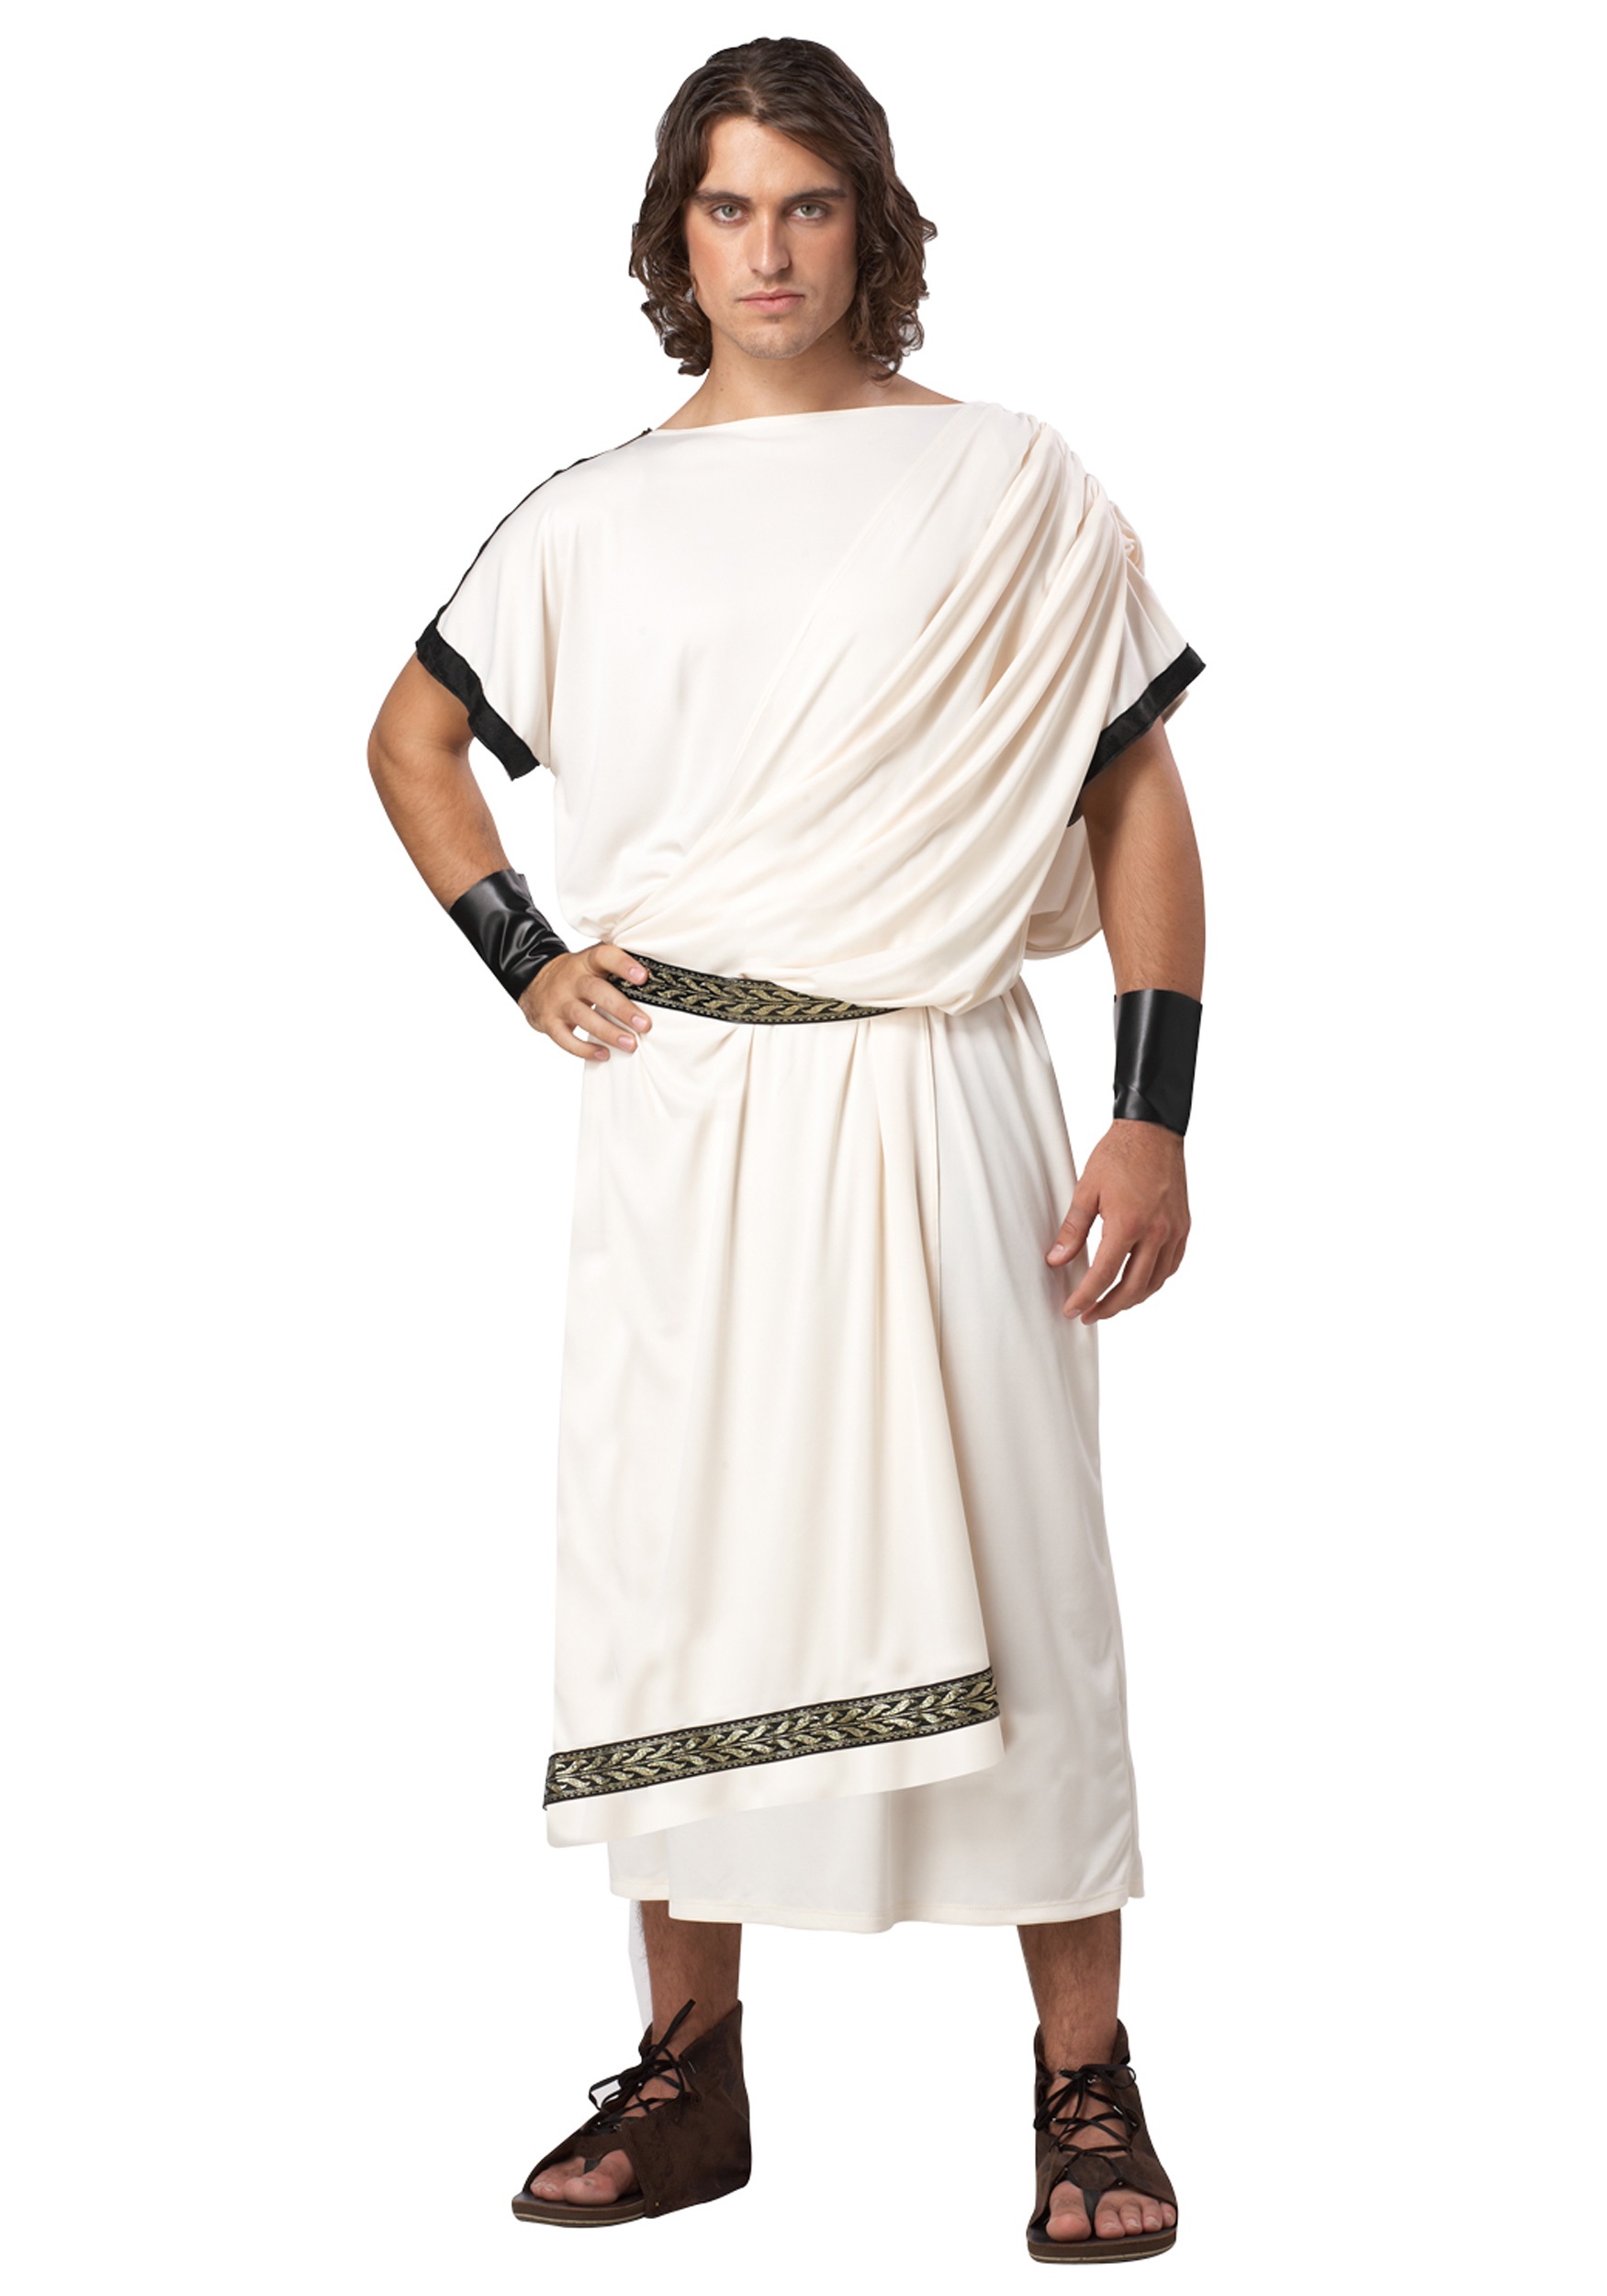 Adult Deluxe White Toga Costume | Historical Costumes